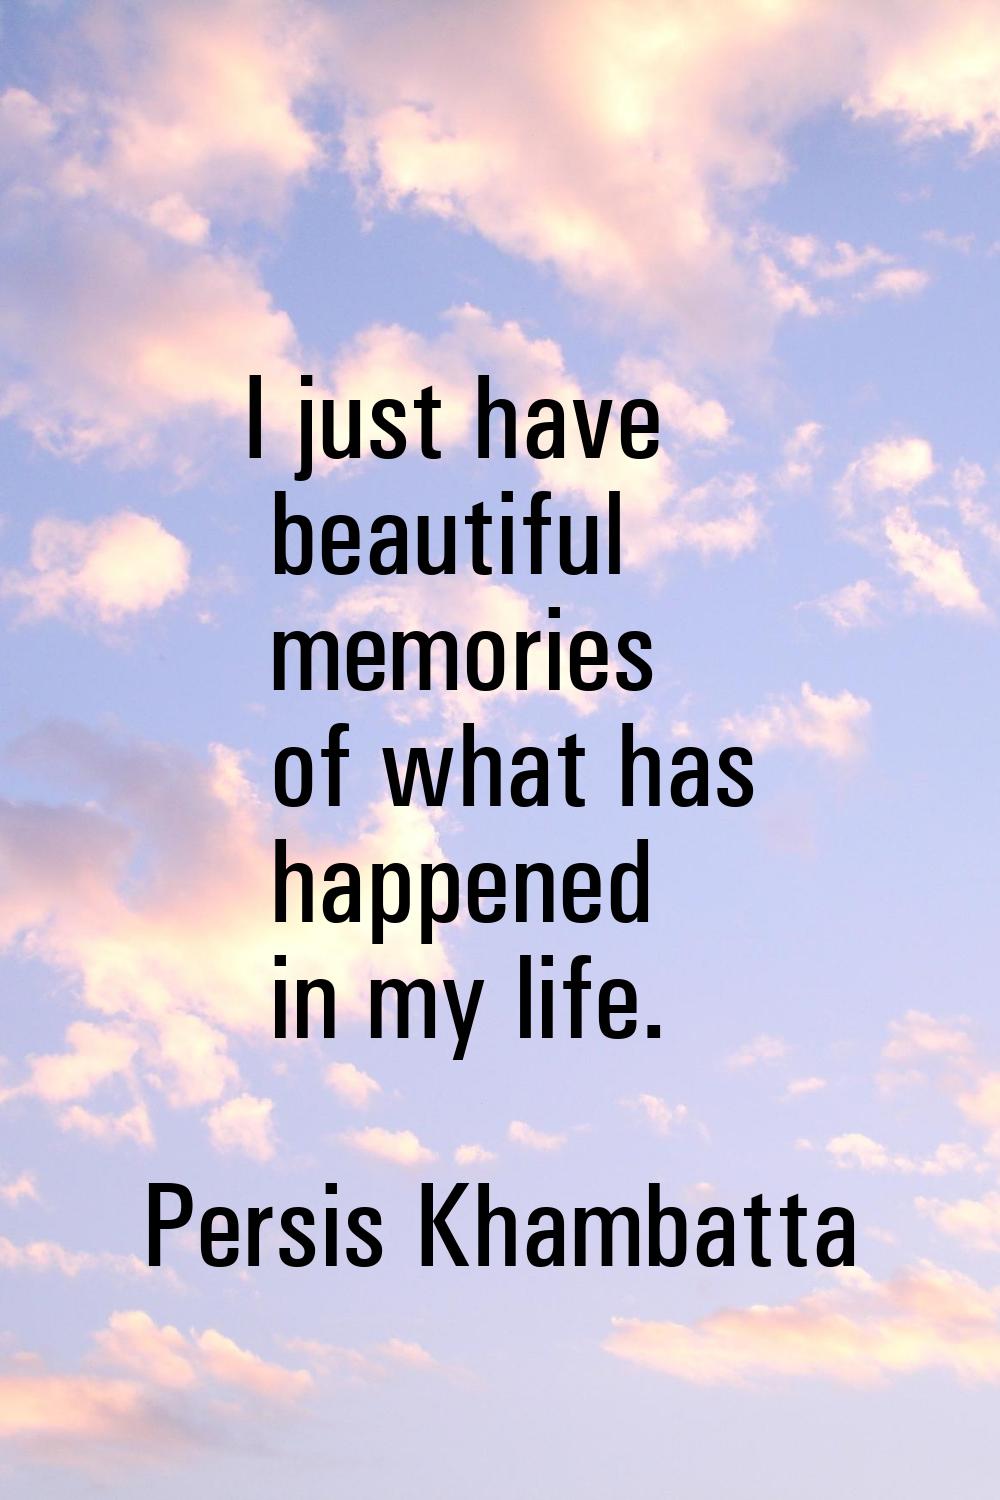 I just have beautiful memories of what has happened in my life.